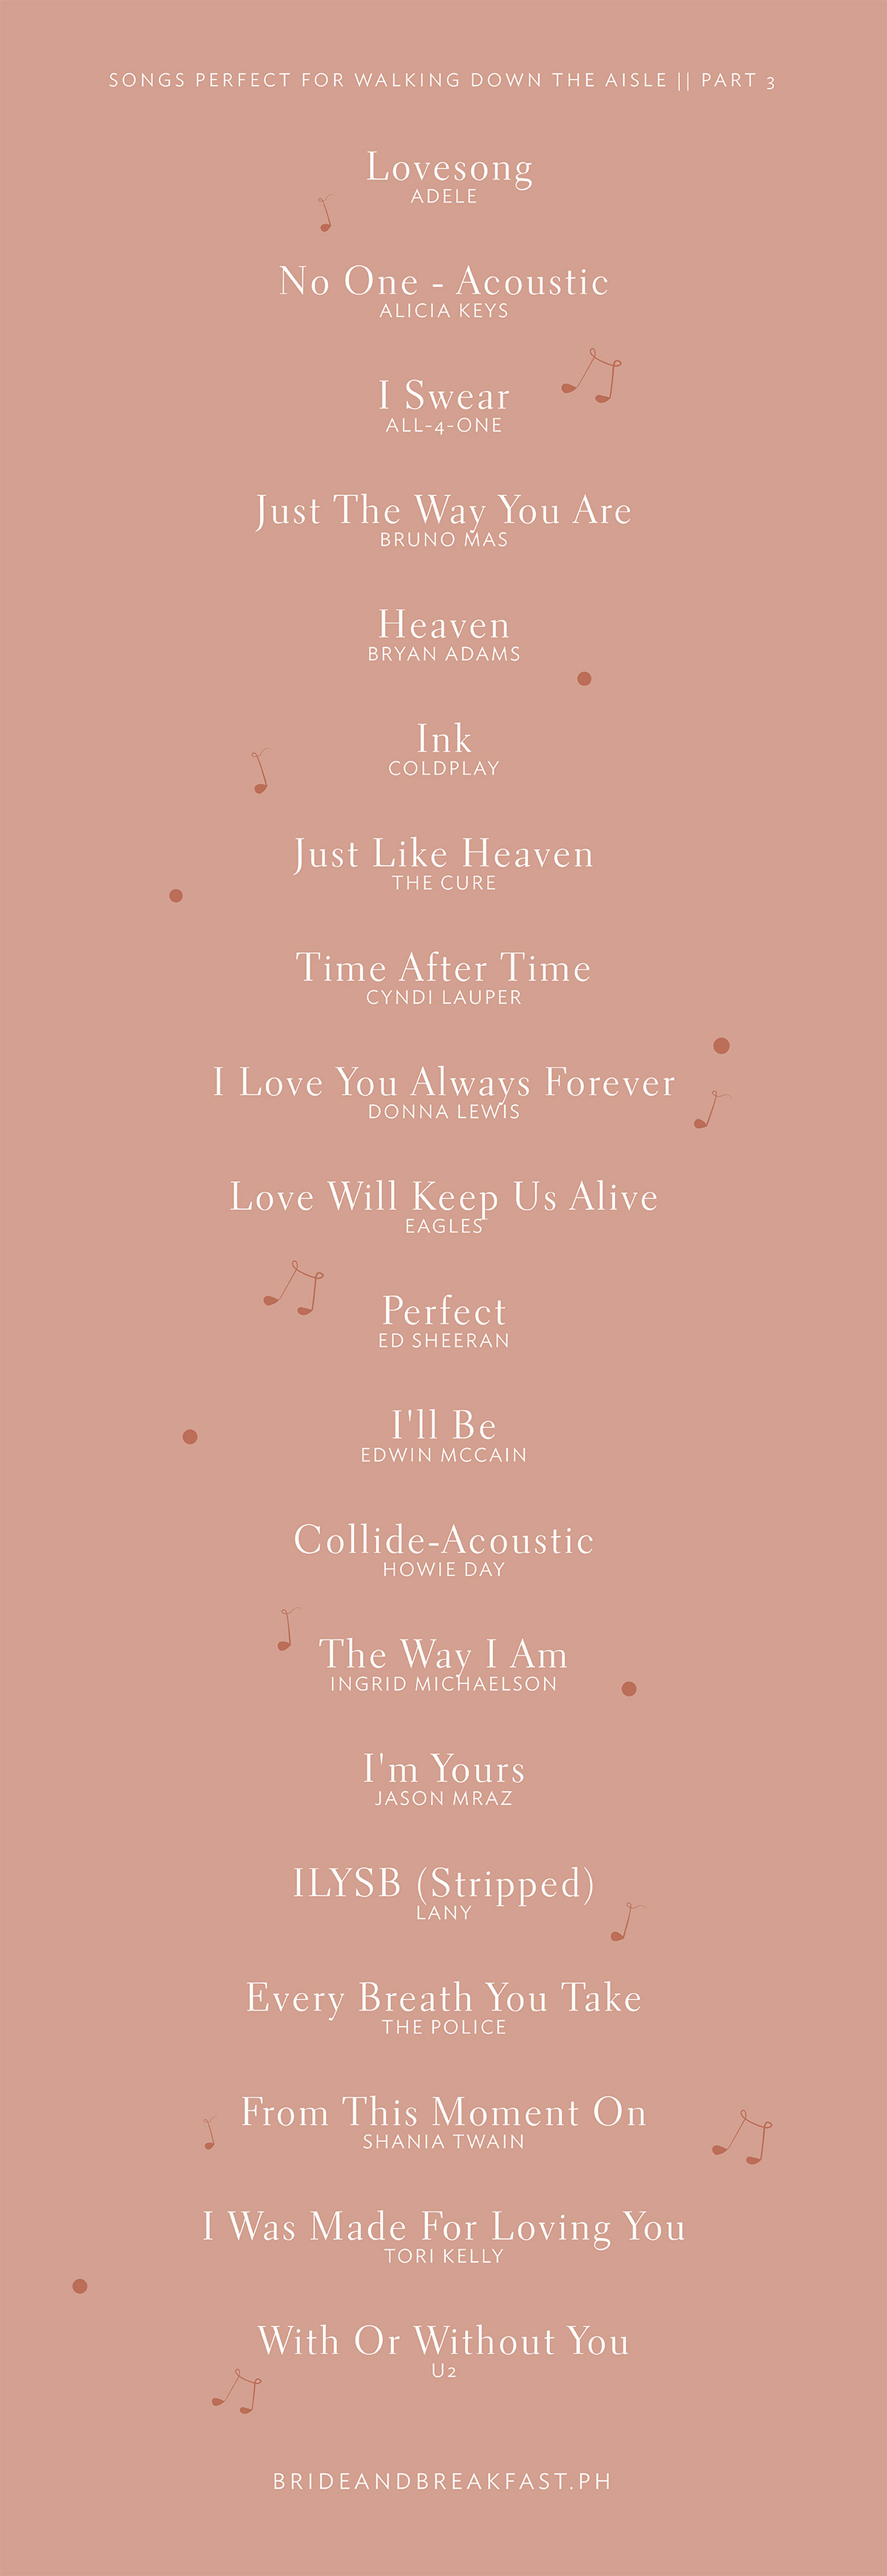 Songs Perfect For Walking Down The Aisle: Part 3